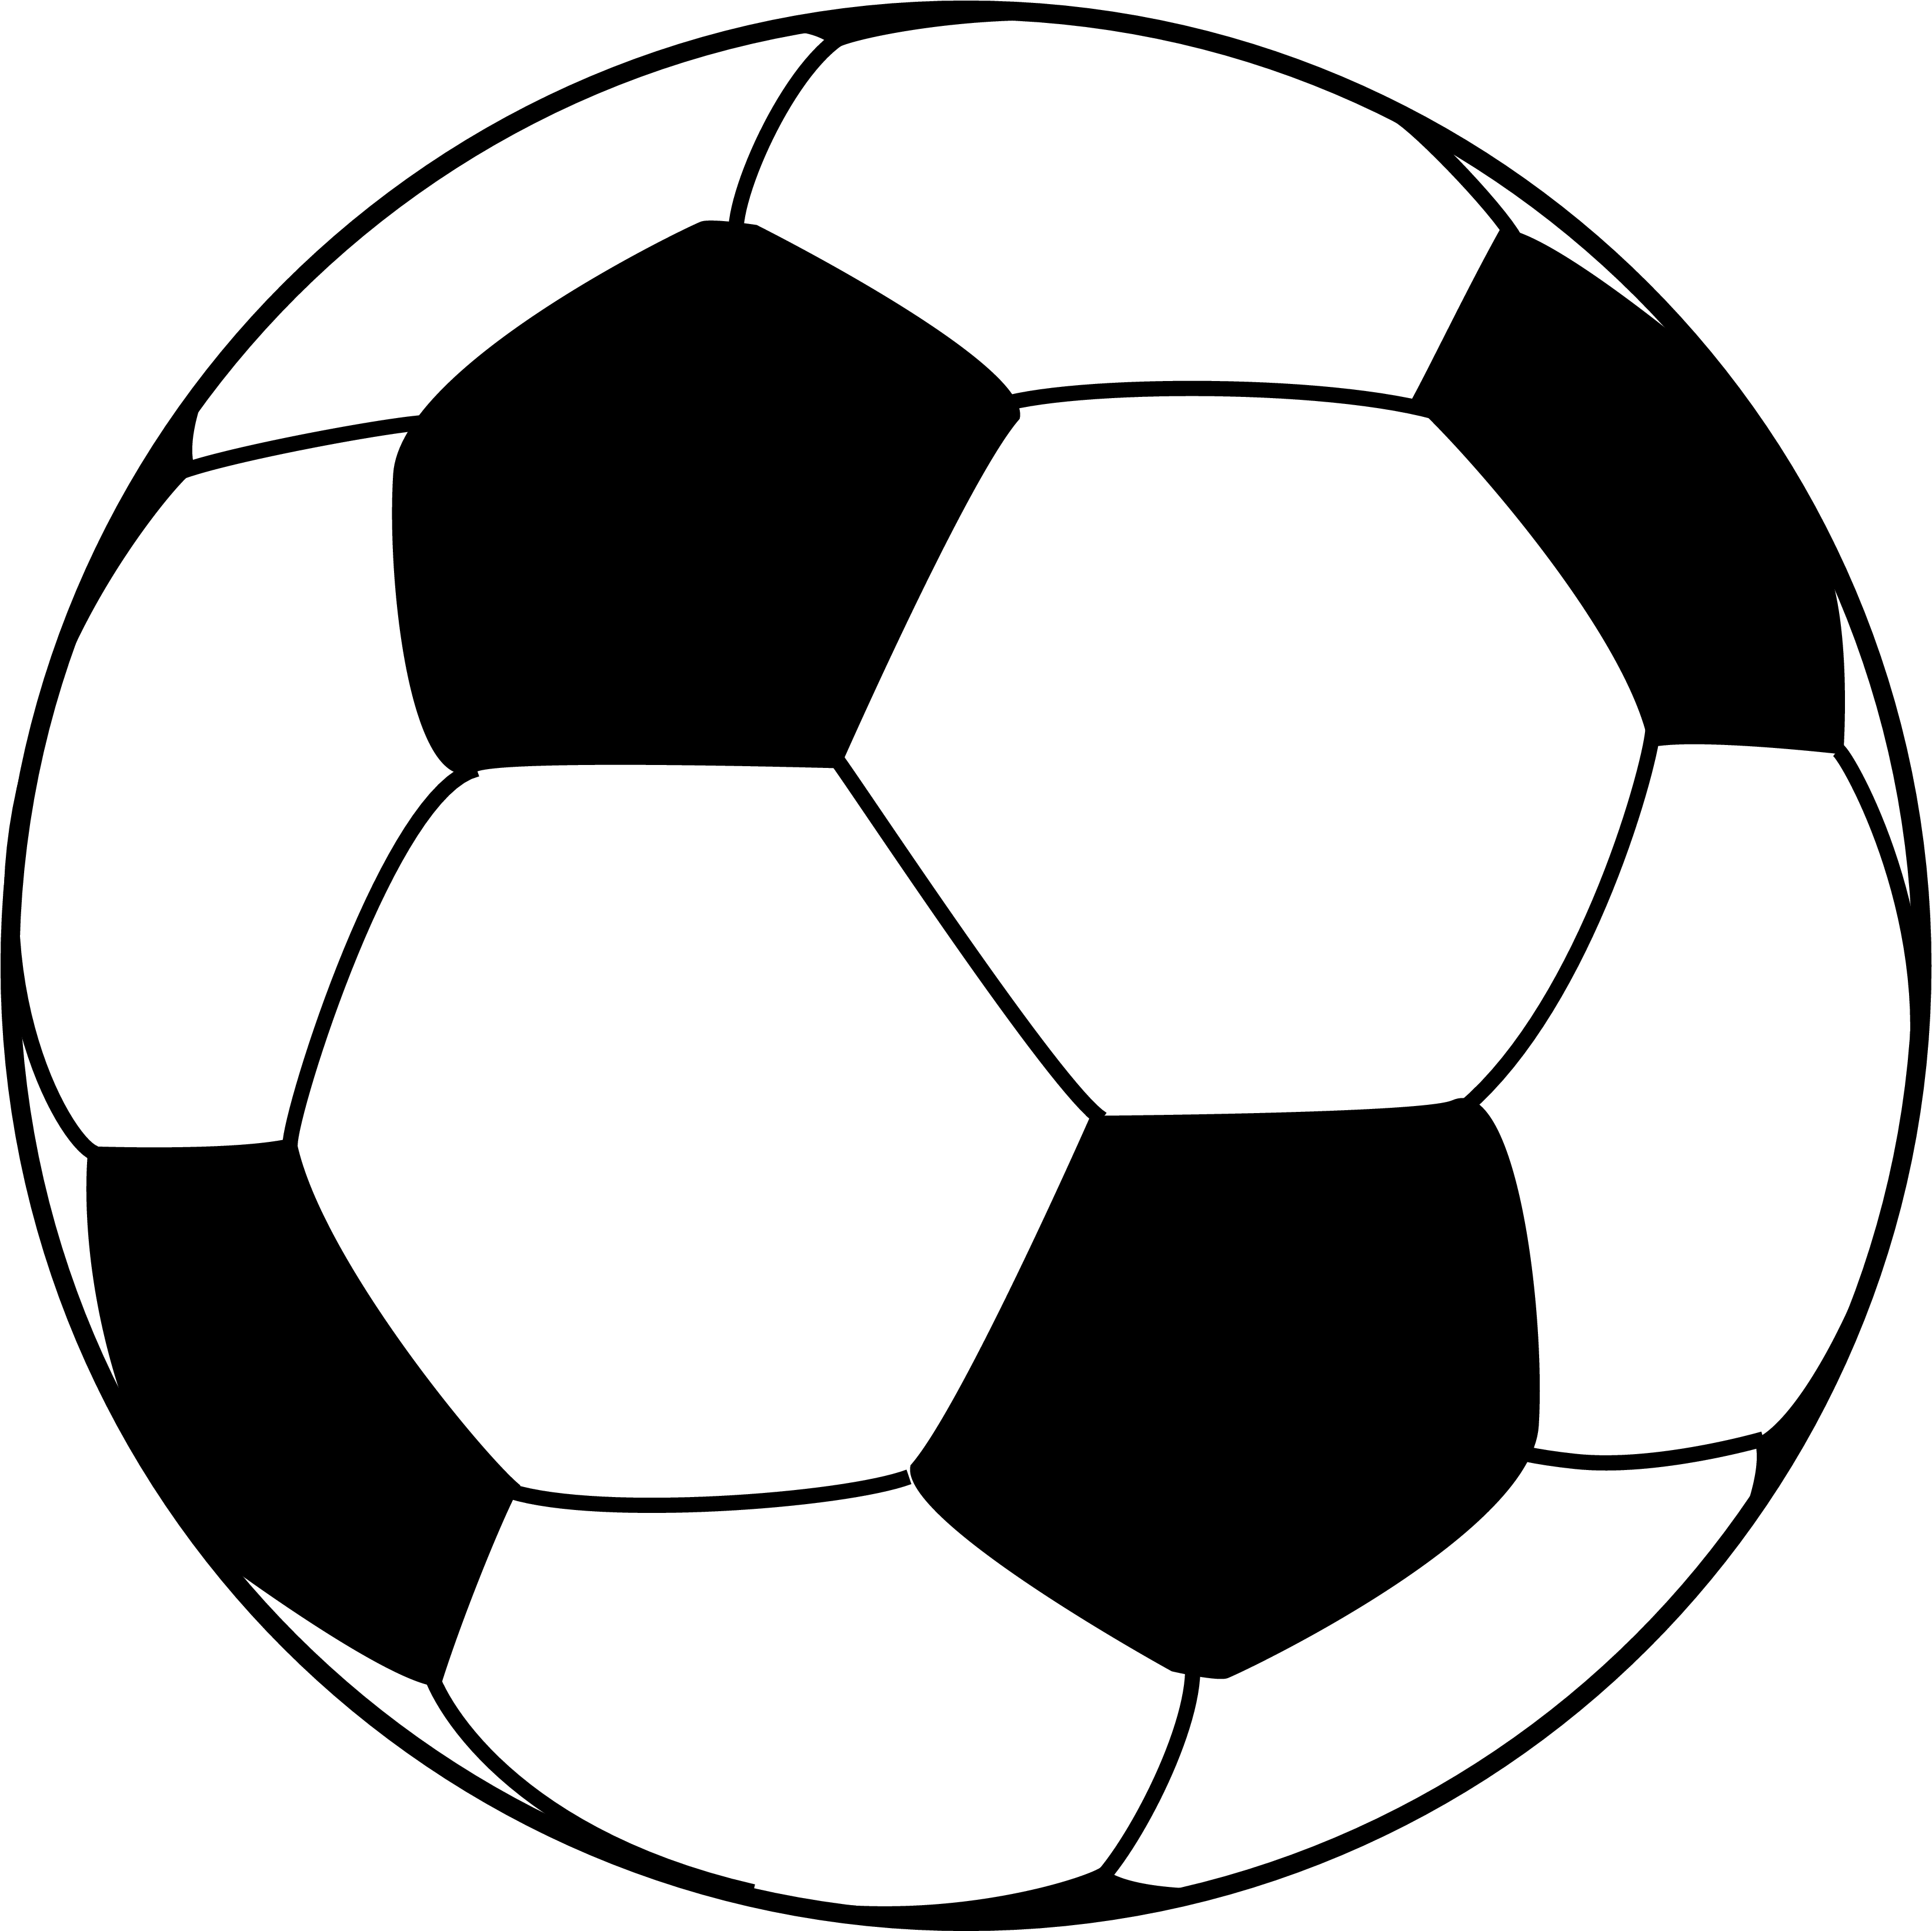 Free Soccer Ball Outline, Download Free Clip Art, Free.